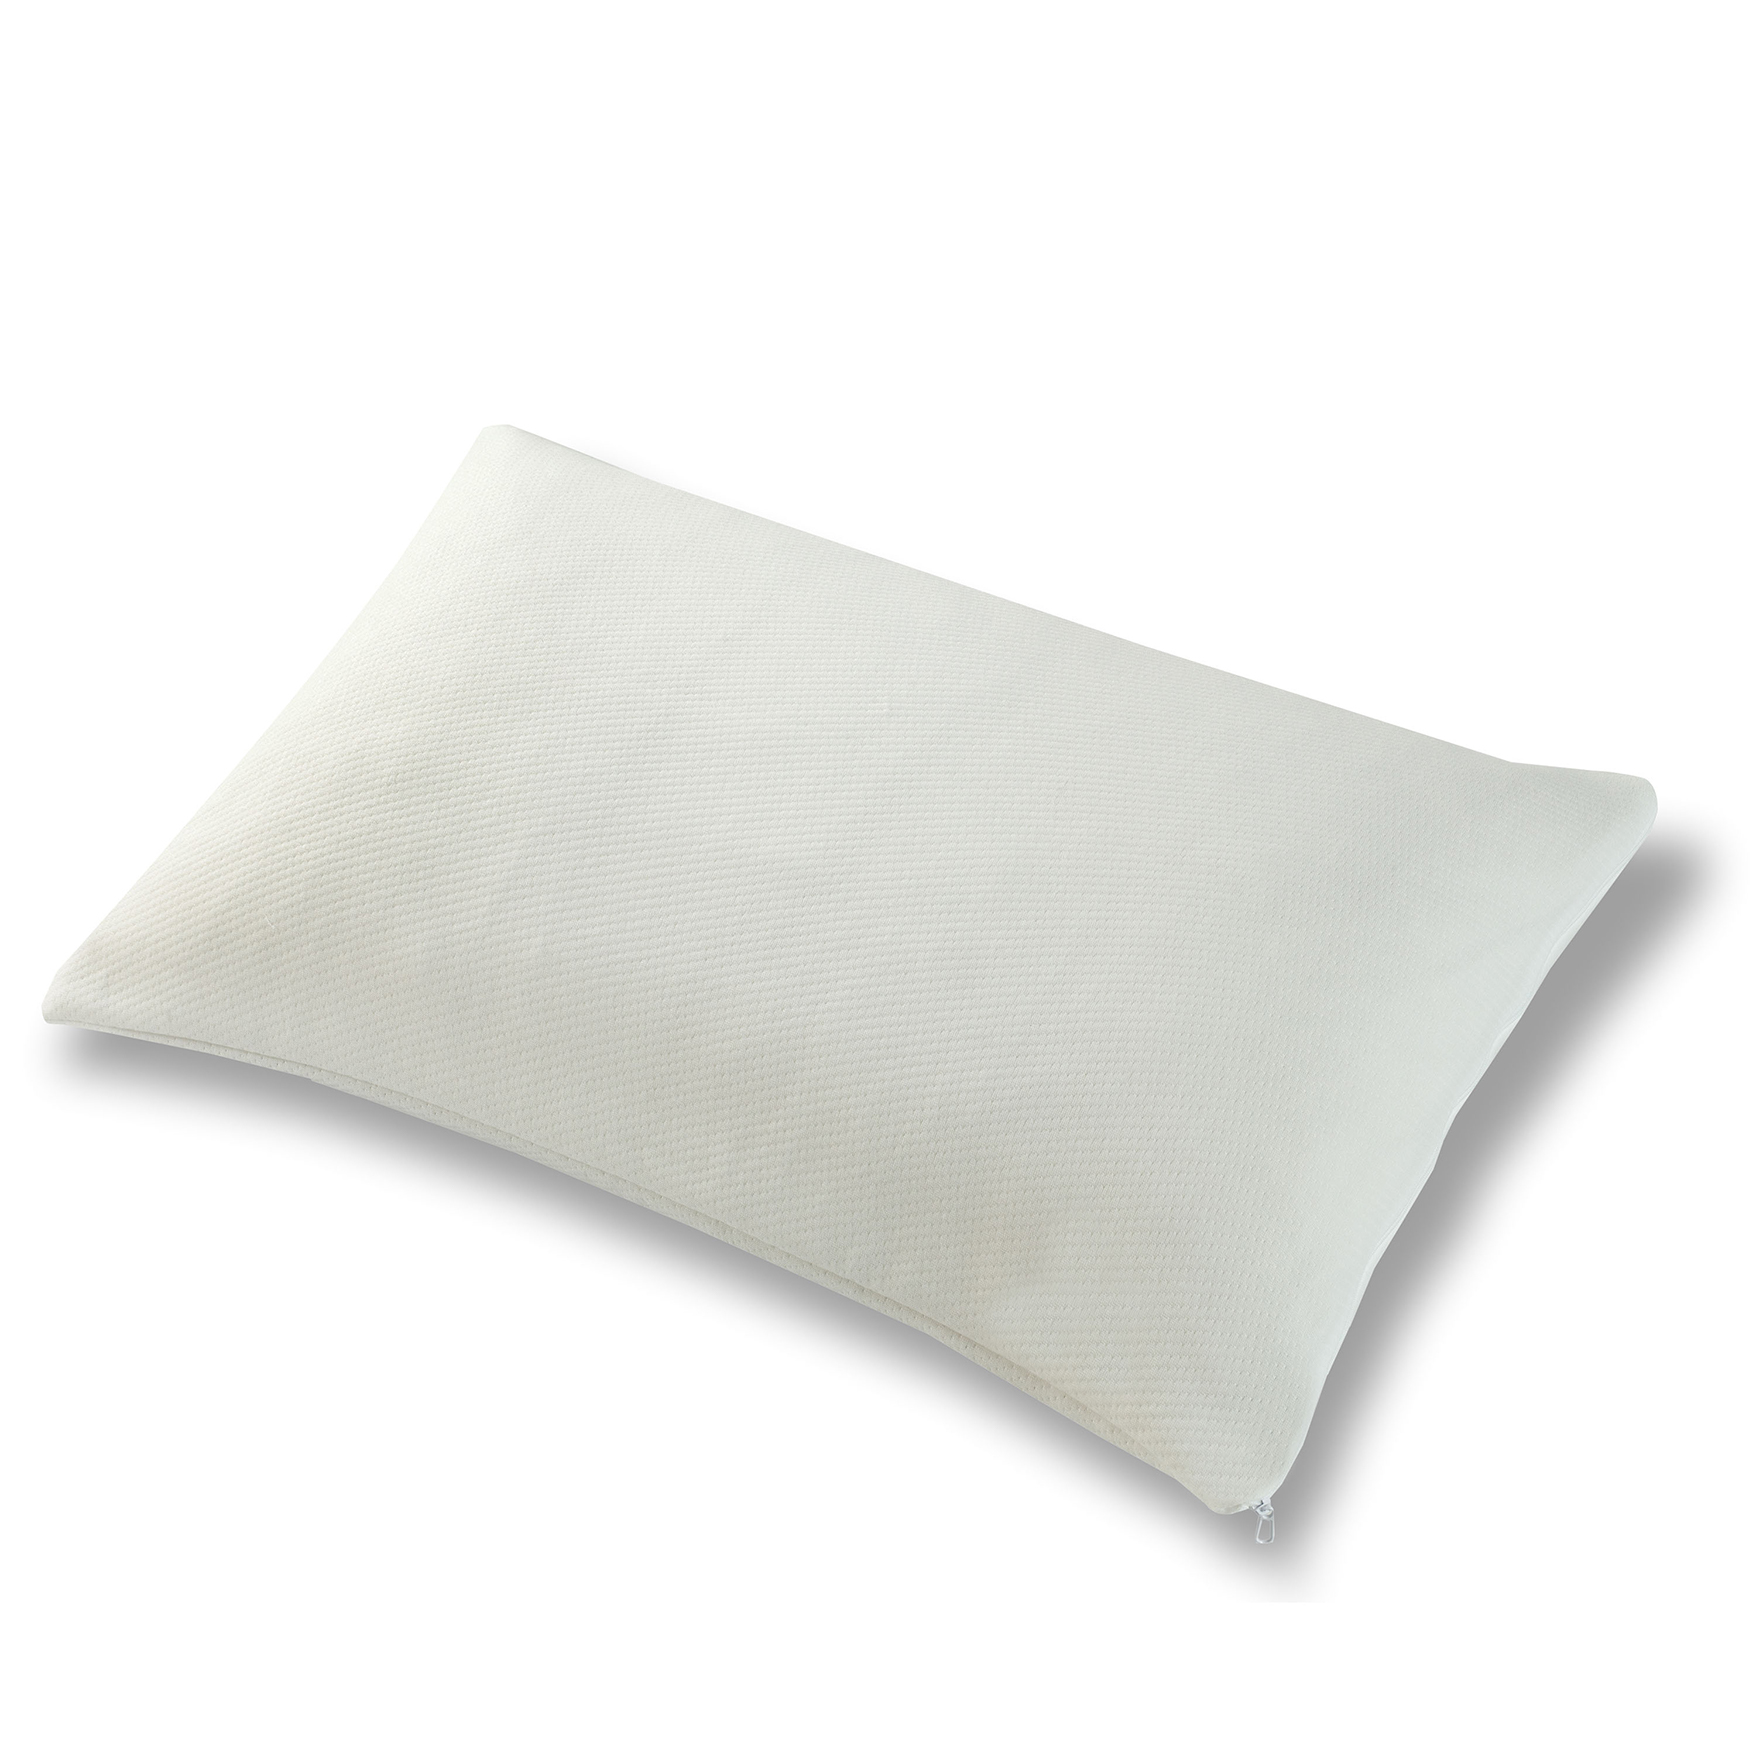 All-In-One Circular Flow Breathable & Cooling Sleep Pillow, Standard, 